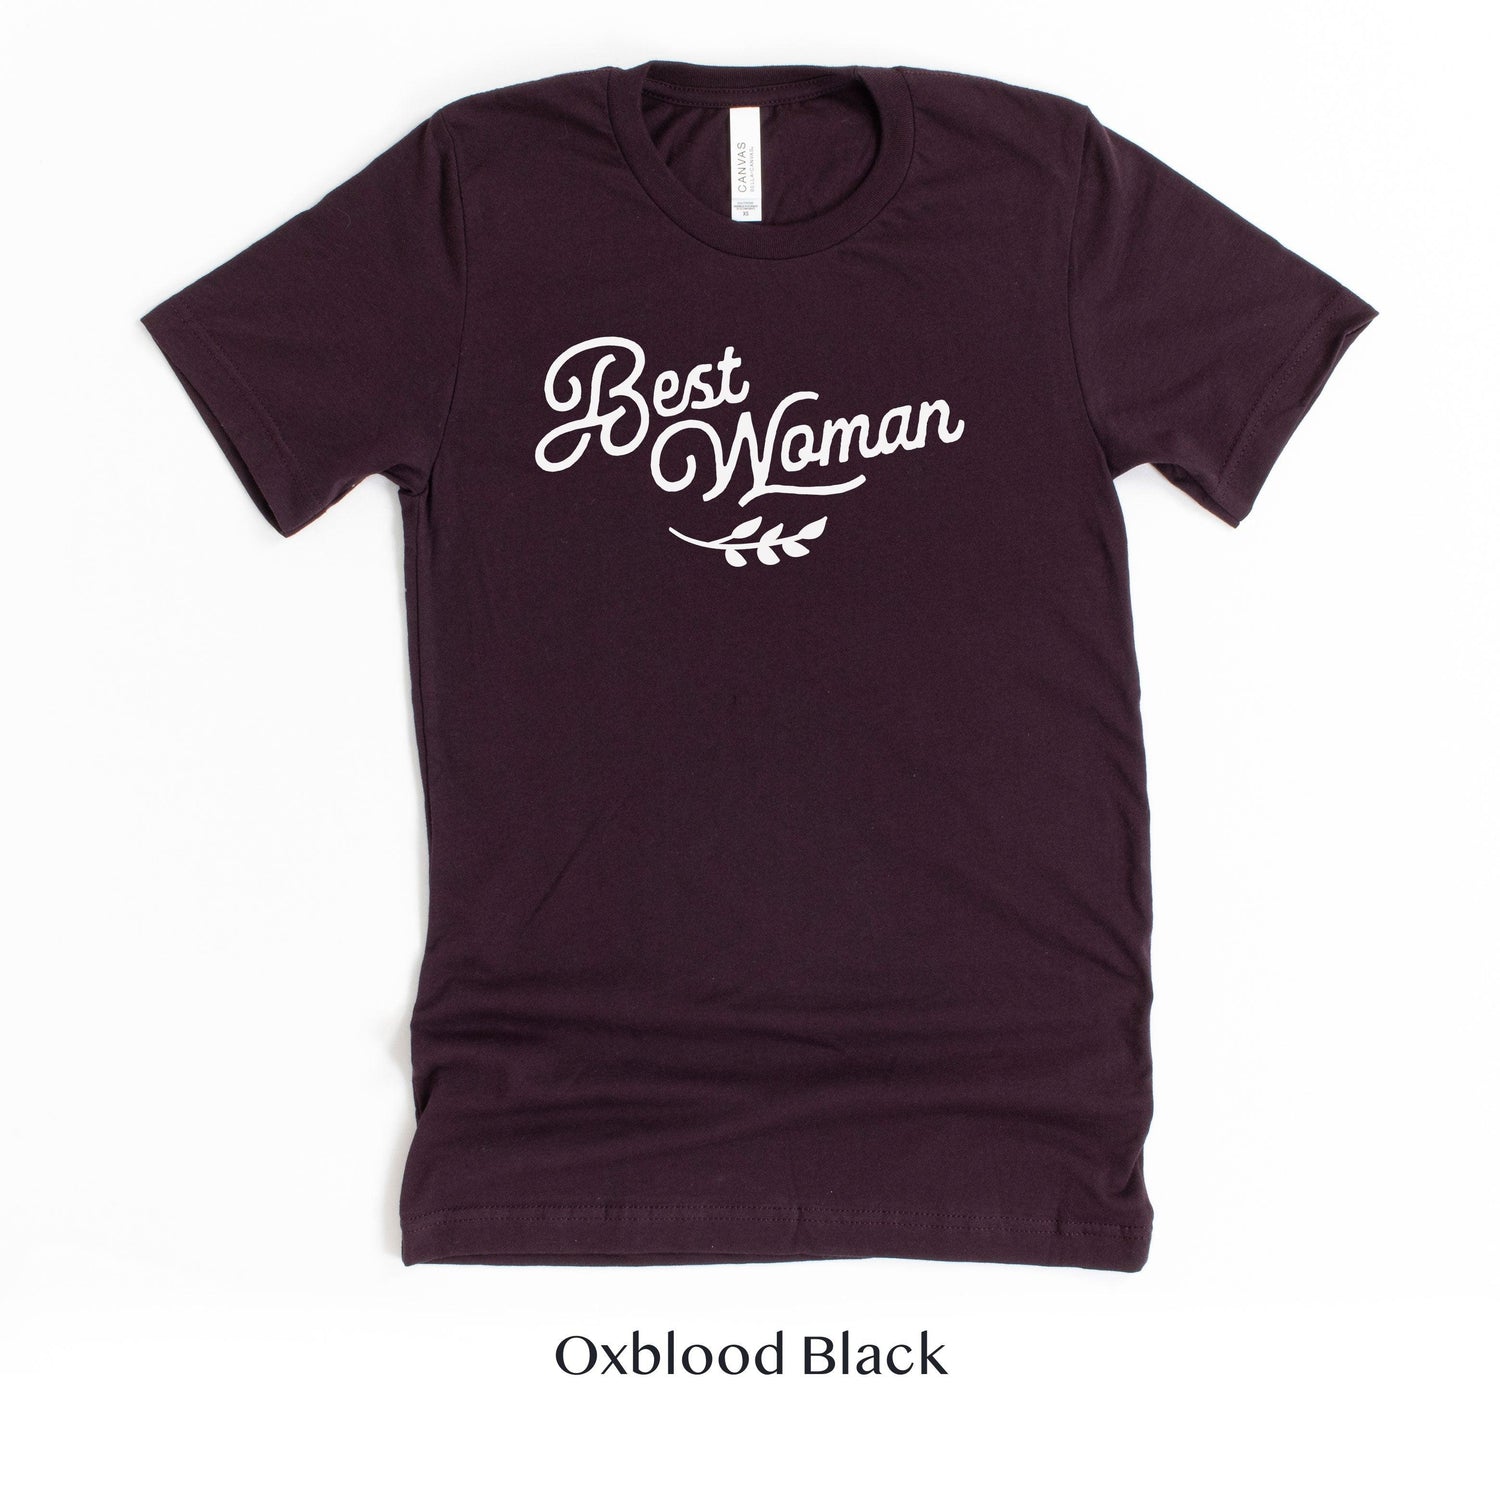 Best Woman Short-Sleeve Tee - Plus Sizes Available by Oaklynn Lane - oxblood deep red shirt